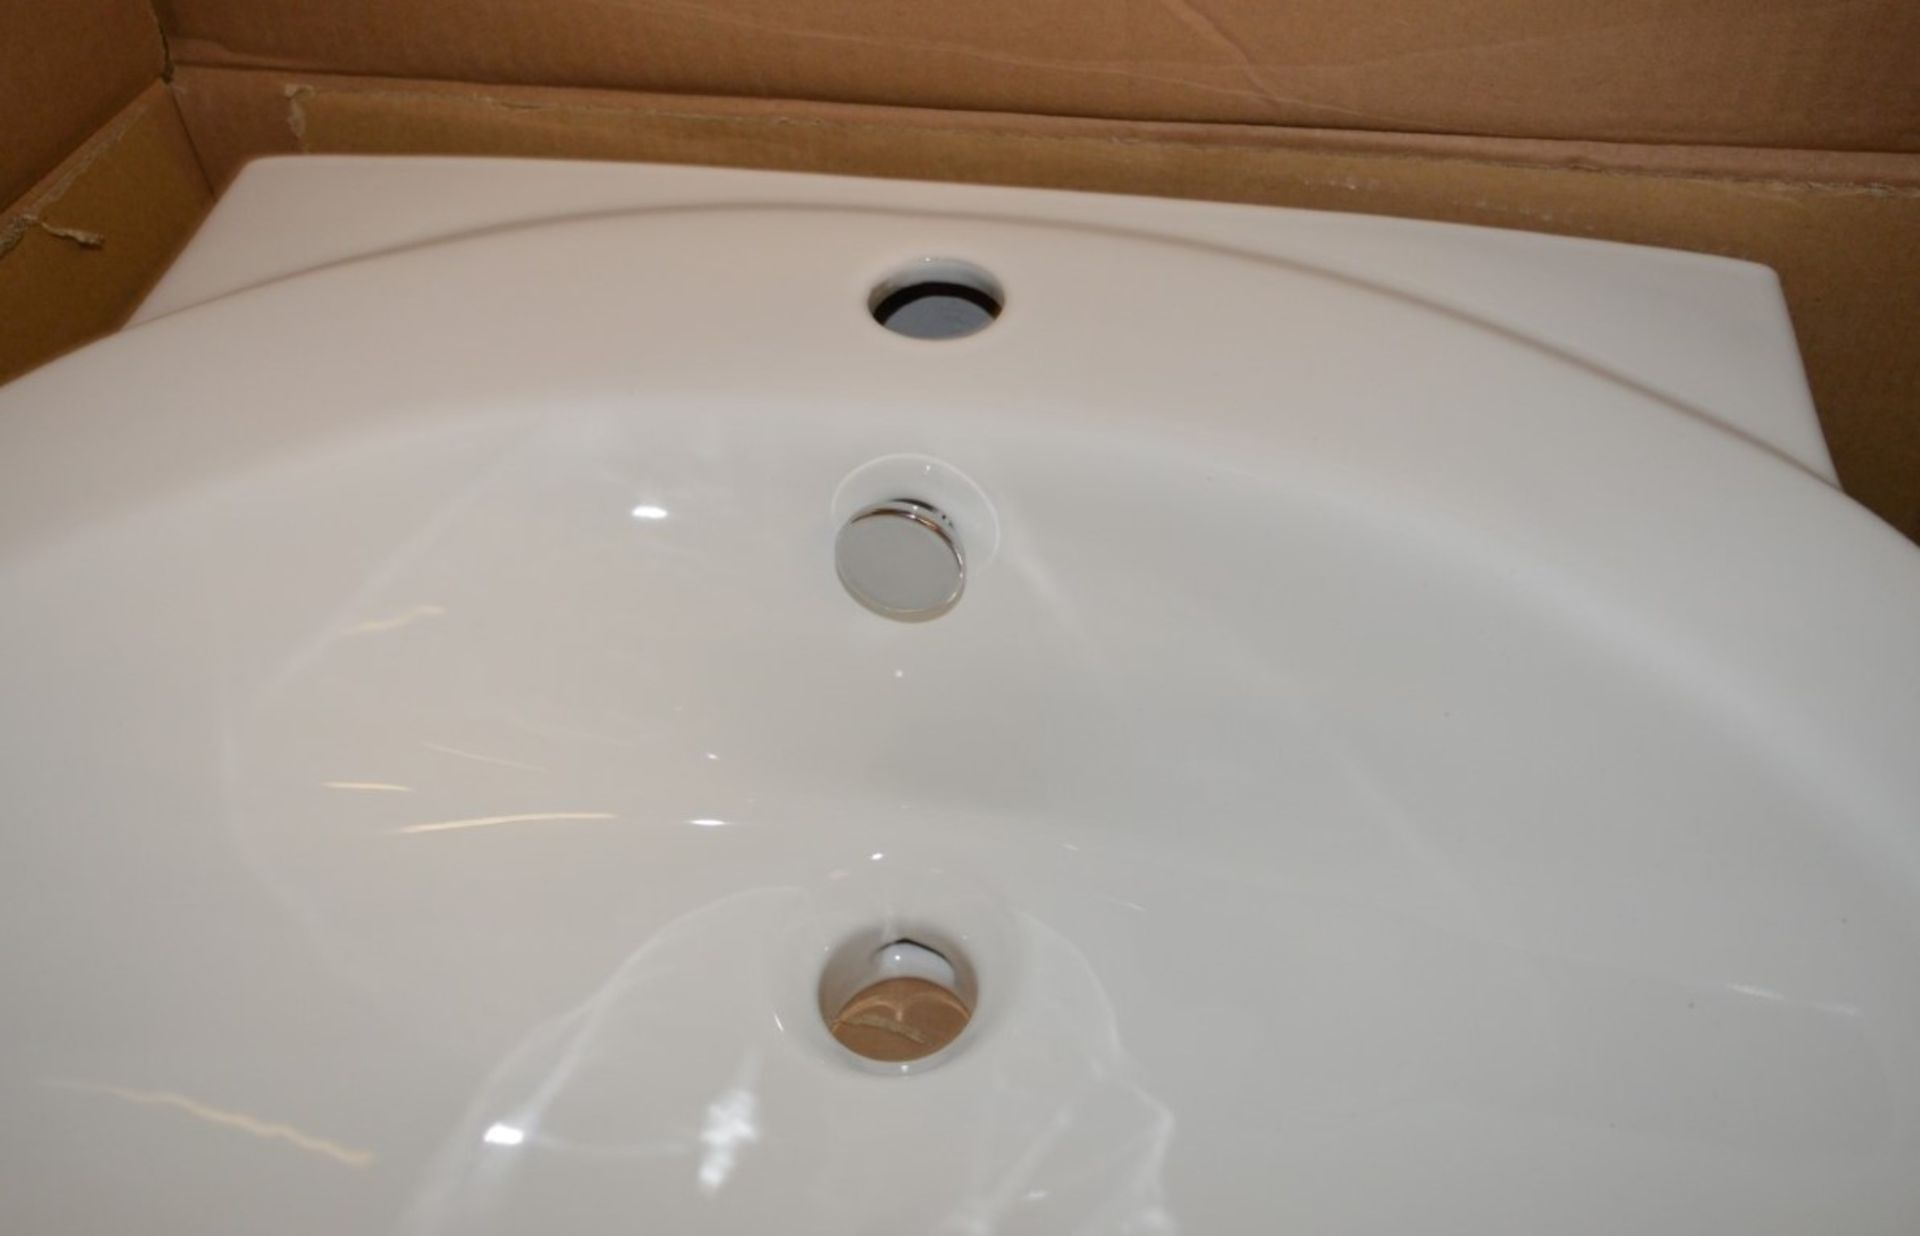 1 x Vogue Bathrooms PORTIA Single Tap Hole SINK BASIN With Pedestal - 600mm Width - Brand New - Image 4 of 4